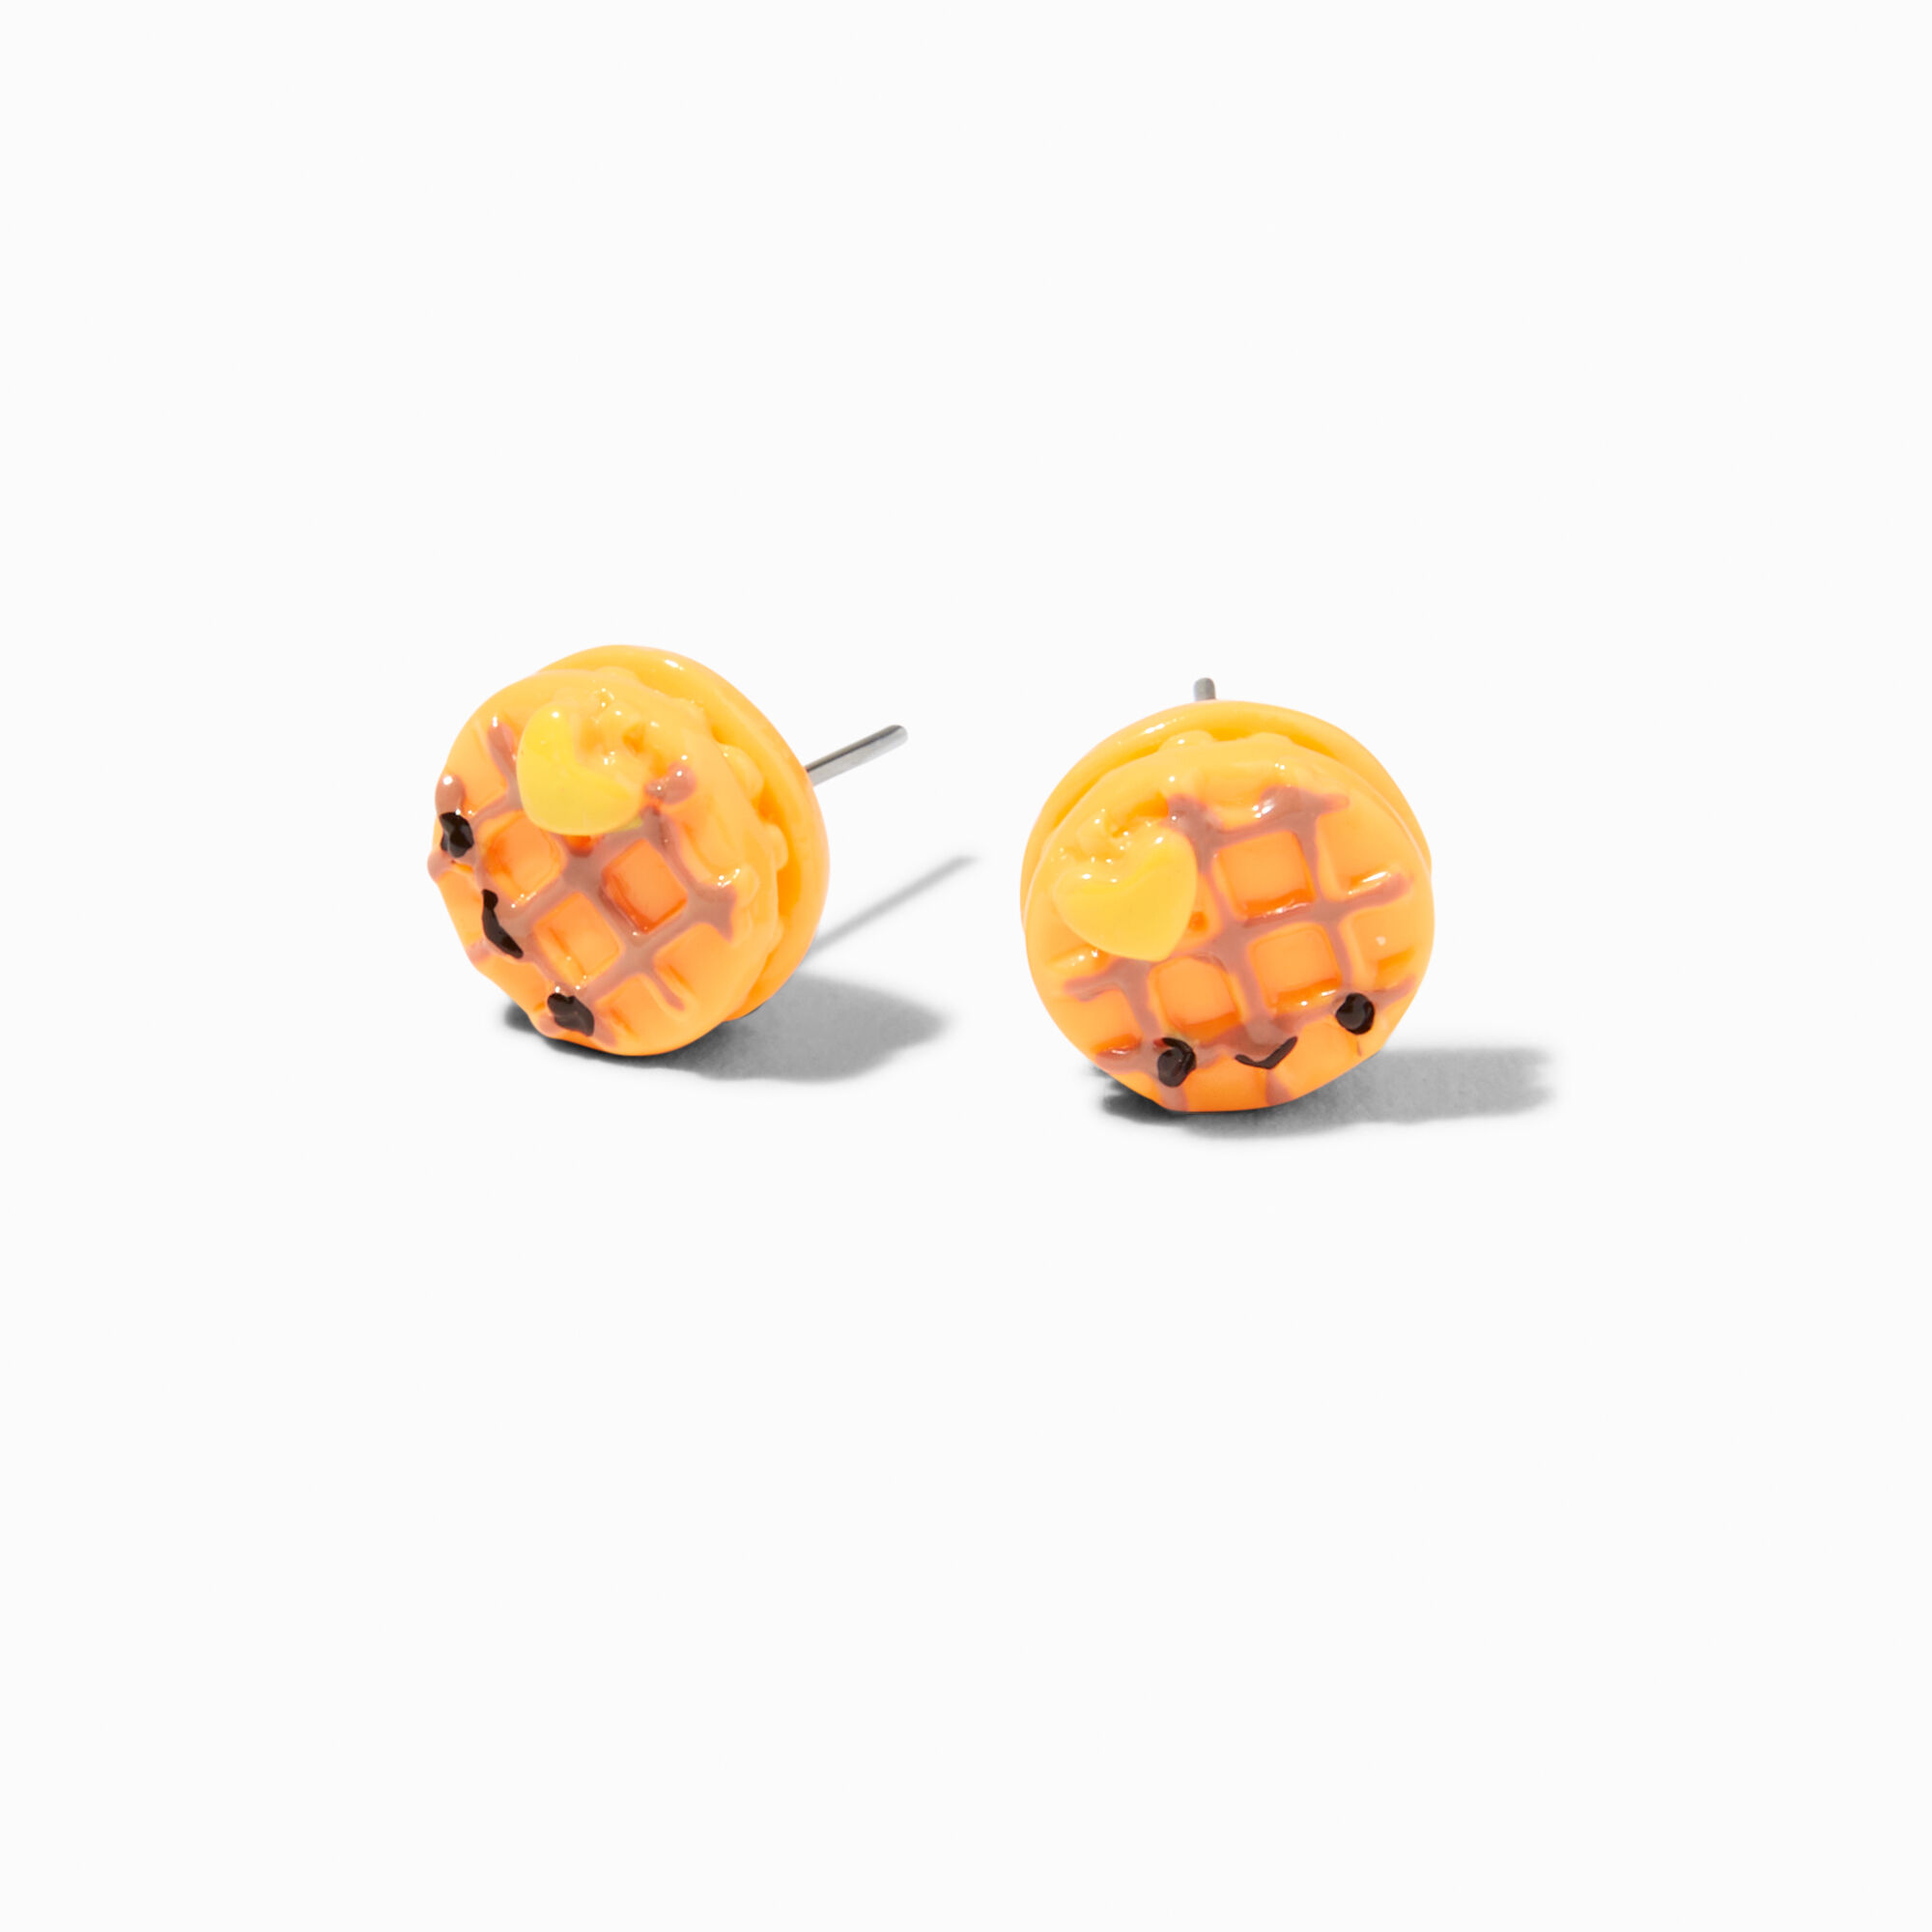 View Claires Happy Face Waffle Stud Earrings Silver information